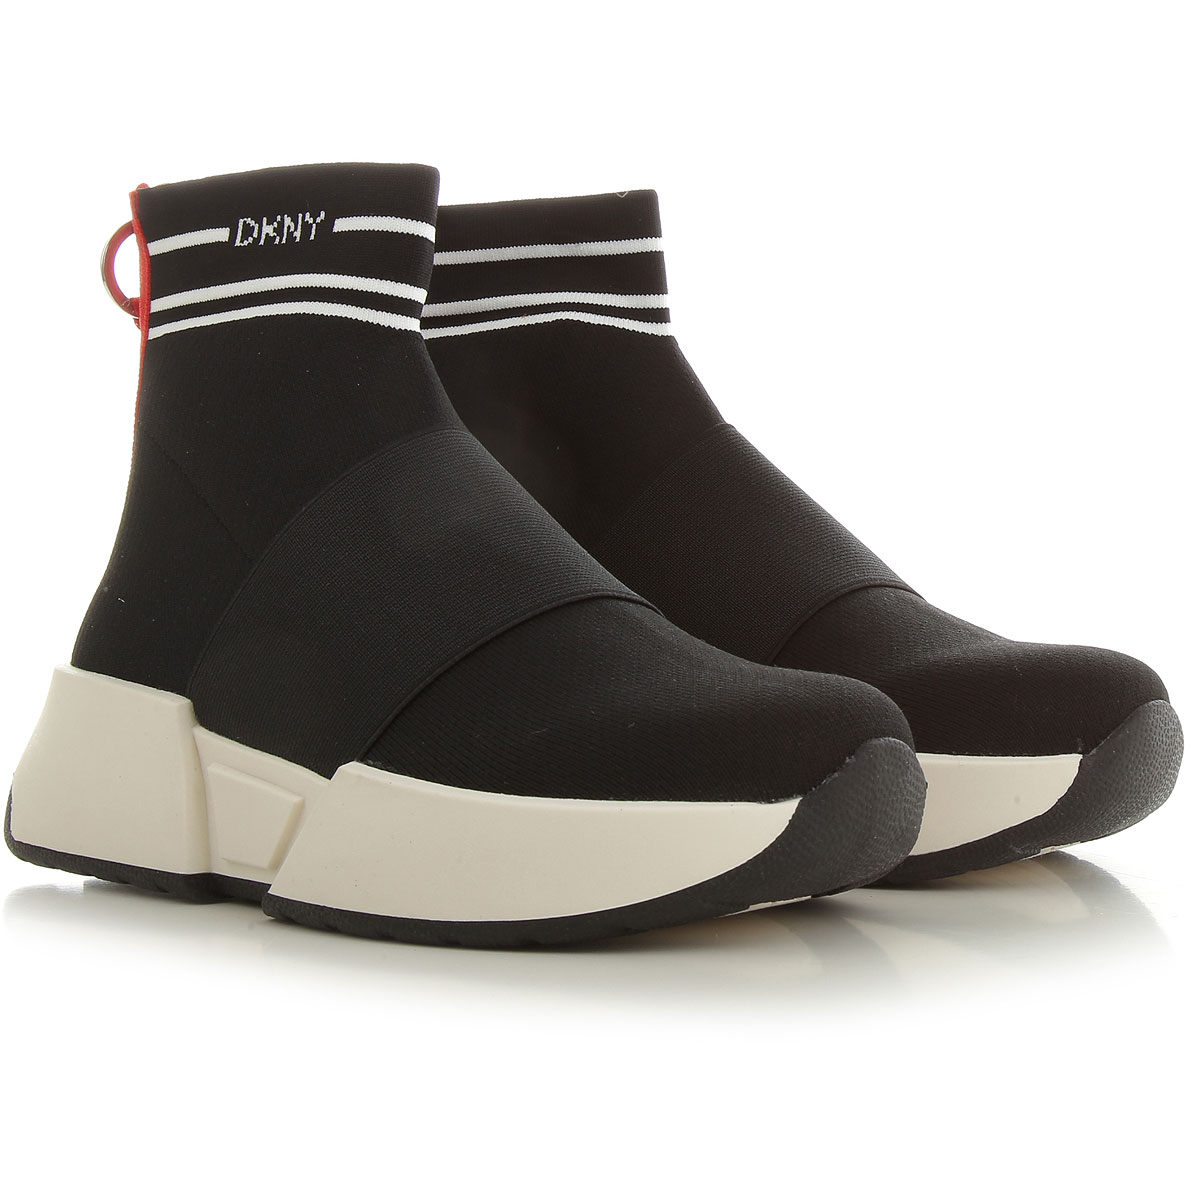 Womens Shoes DKNY, Style code: k2920251--